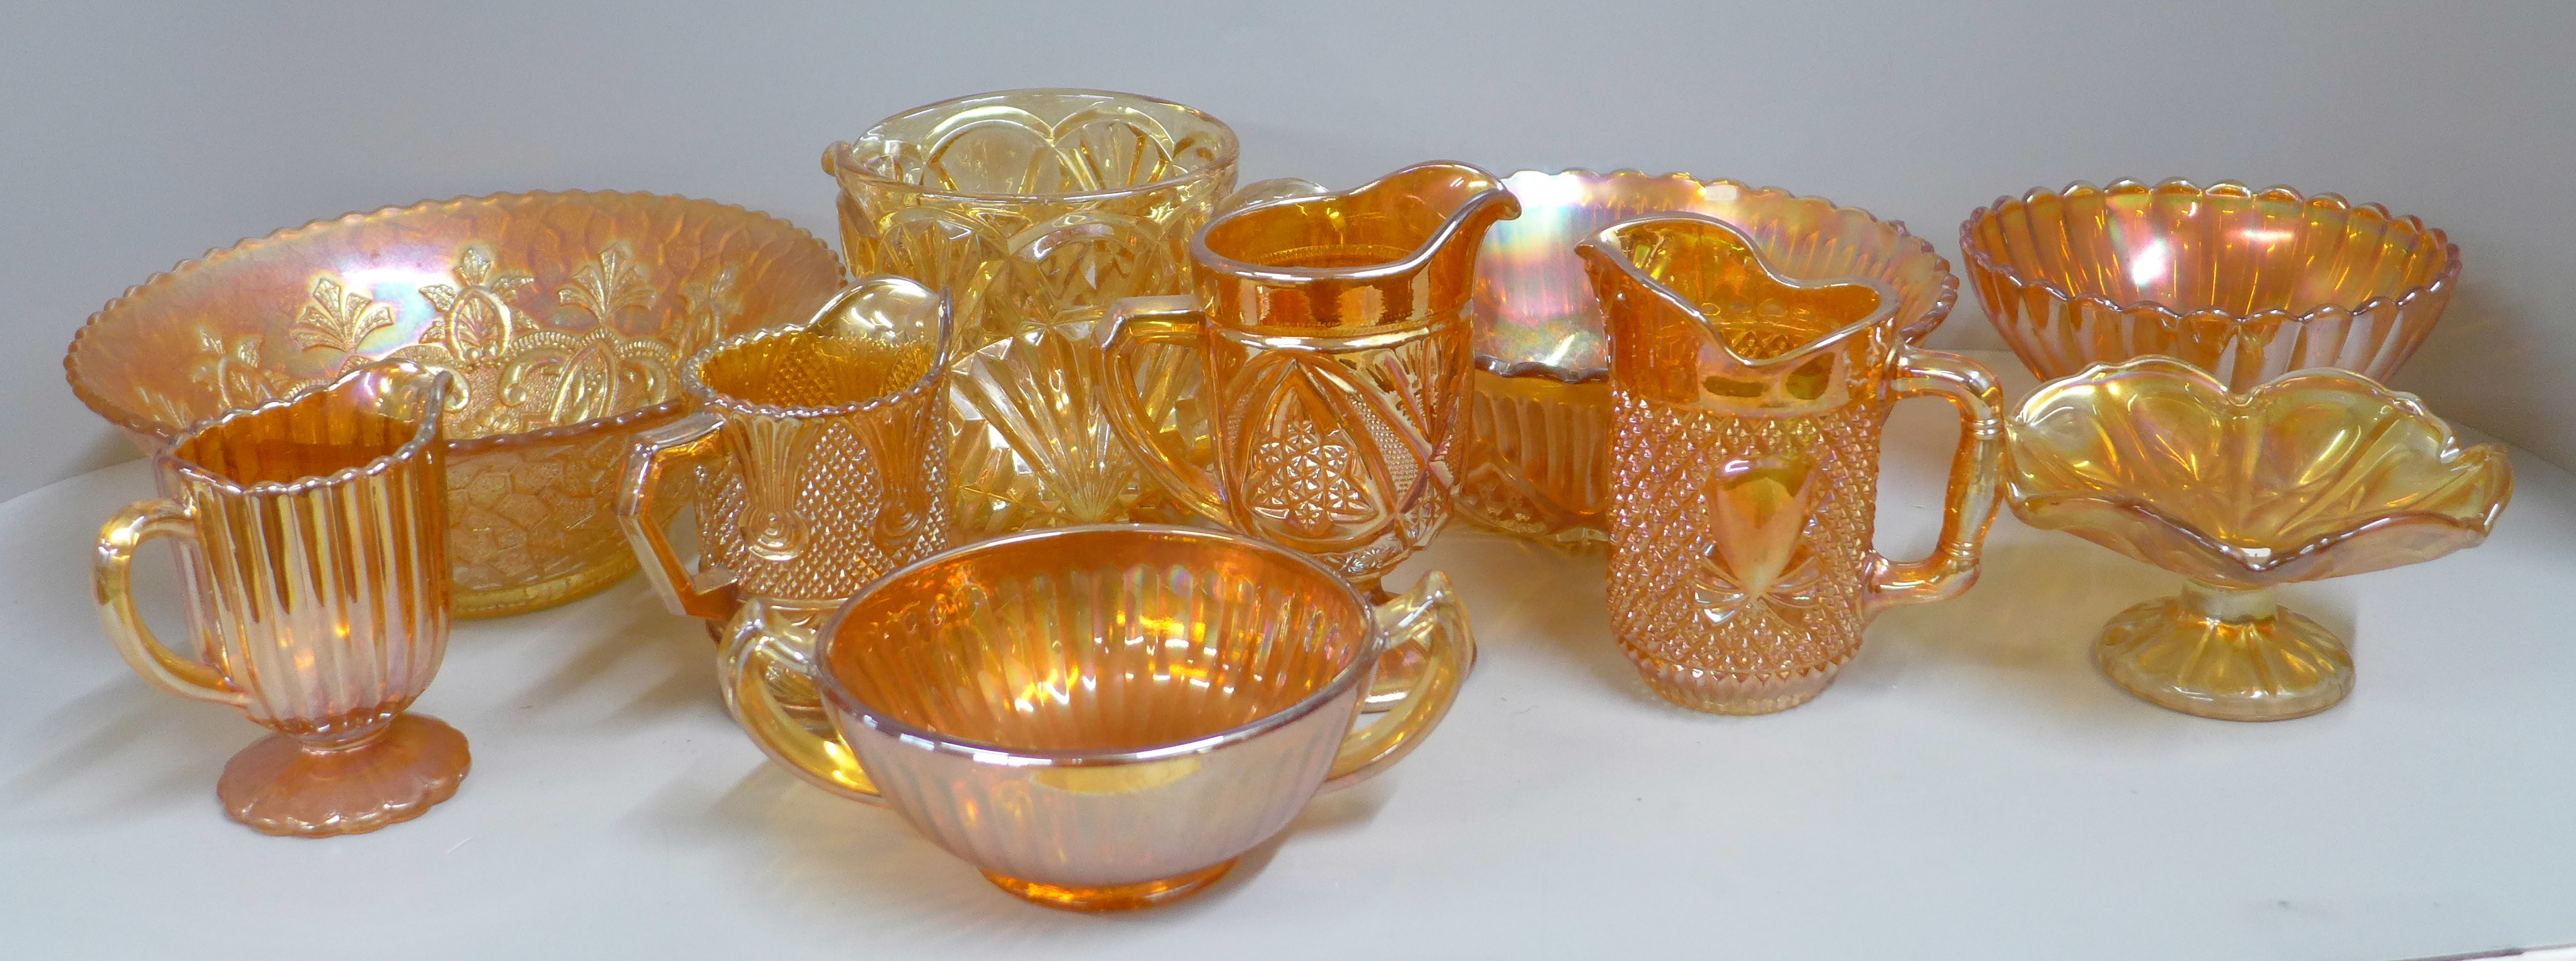 Ten items of marigold carnival glass, five jugs/pitchers, two pedestal bowls, other bowls